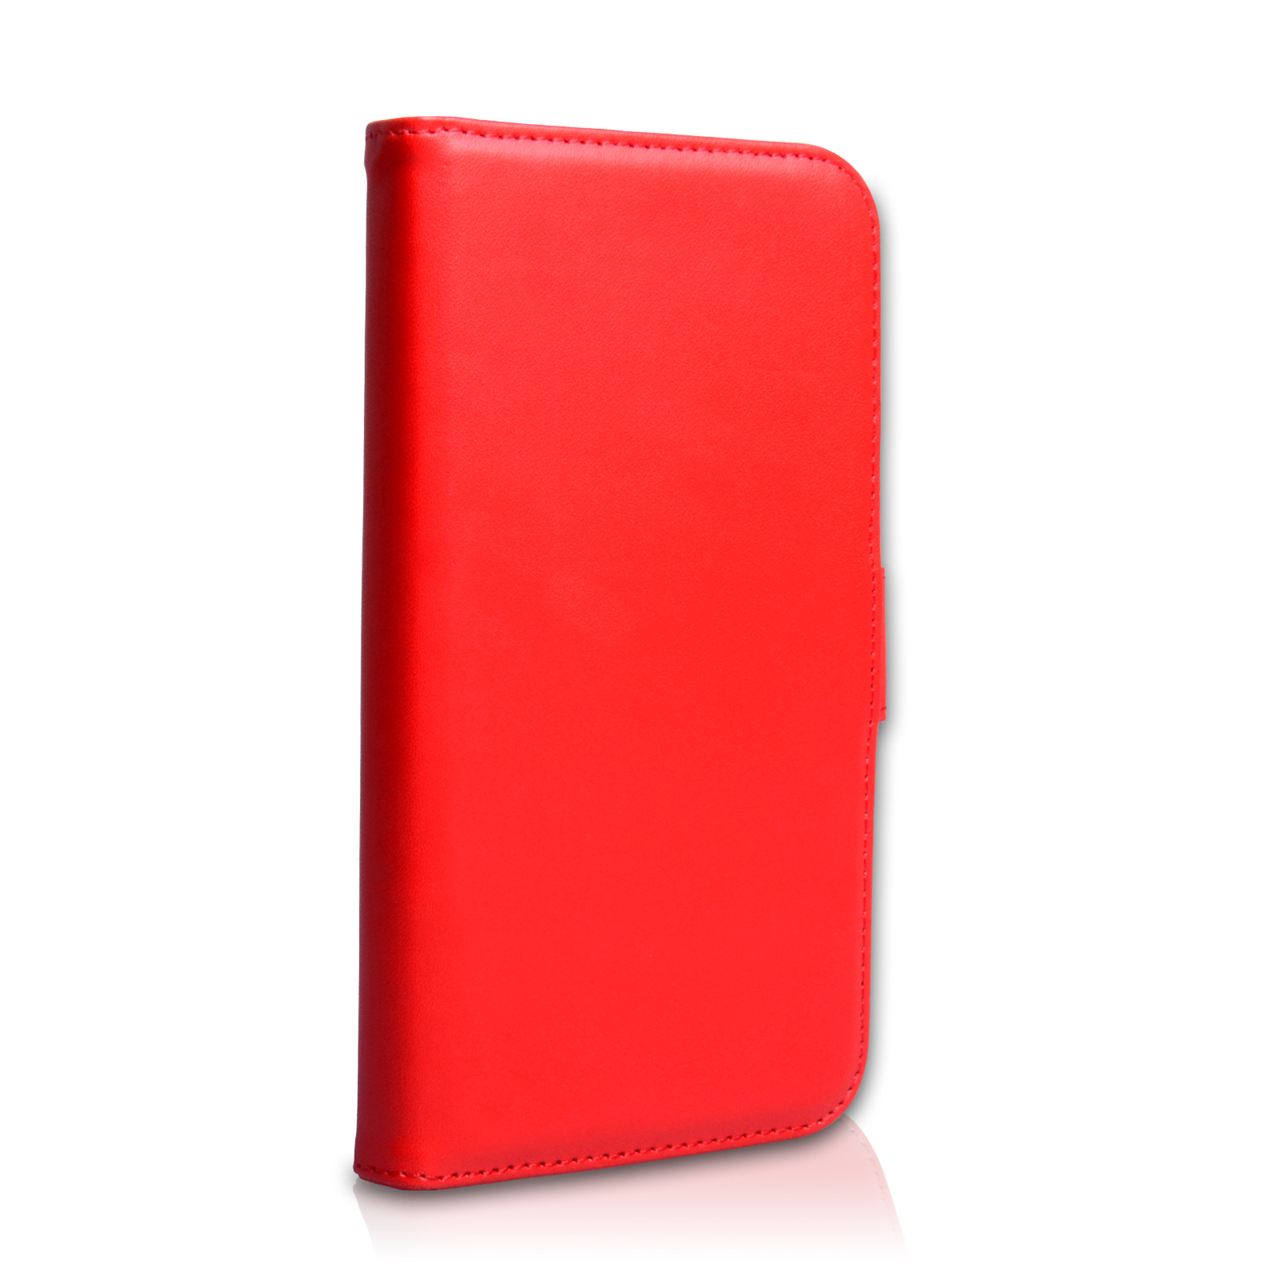 YouSave Samsung Galaxy Note 3 Leather Effect Wallet Case - Red